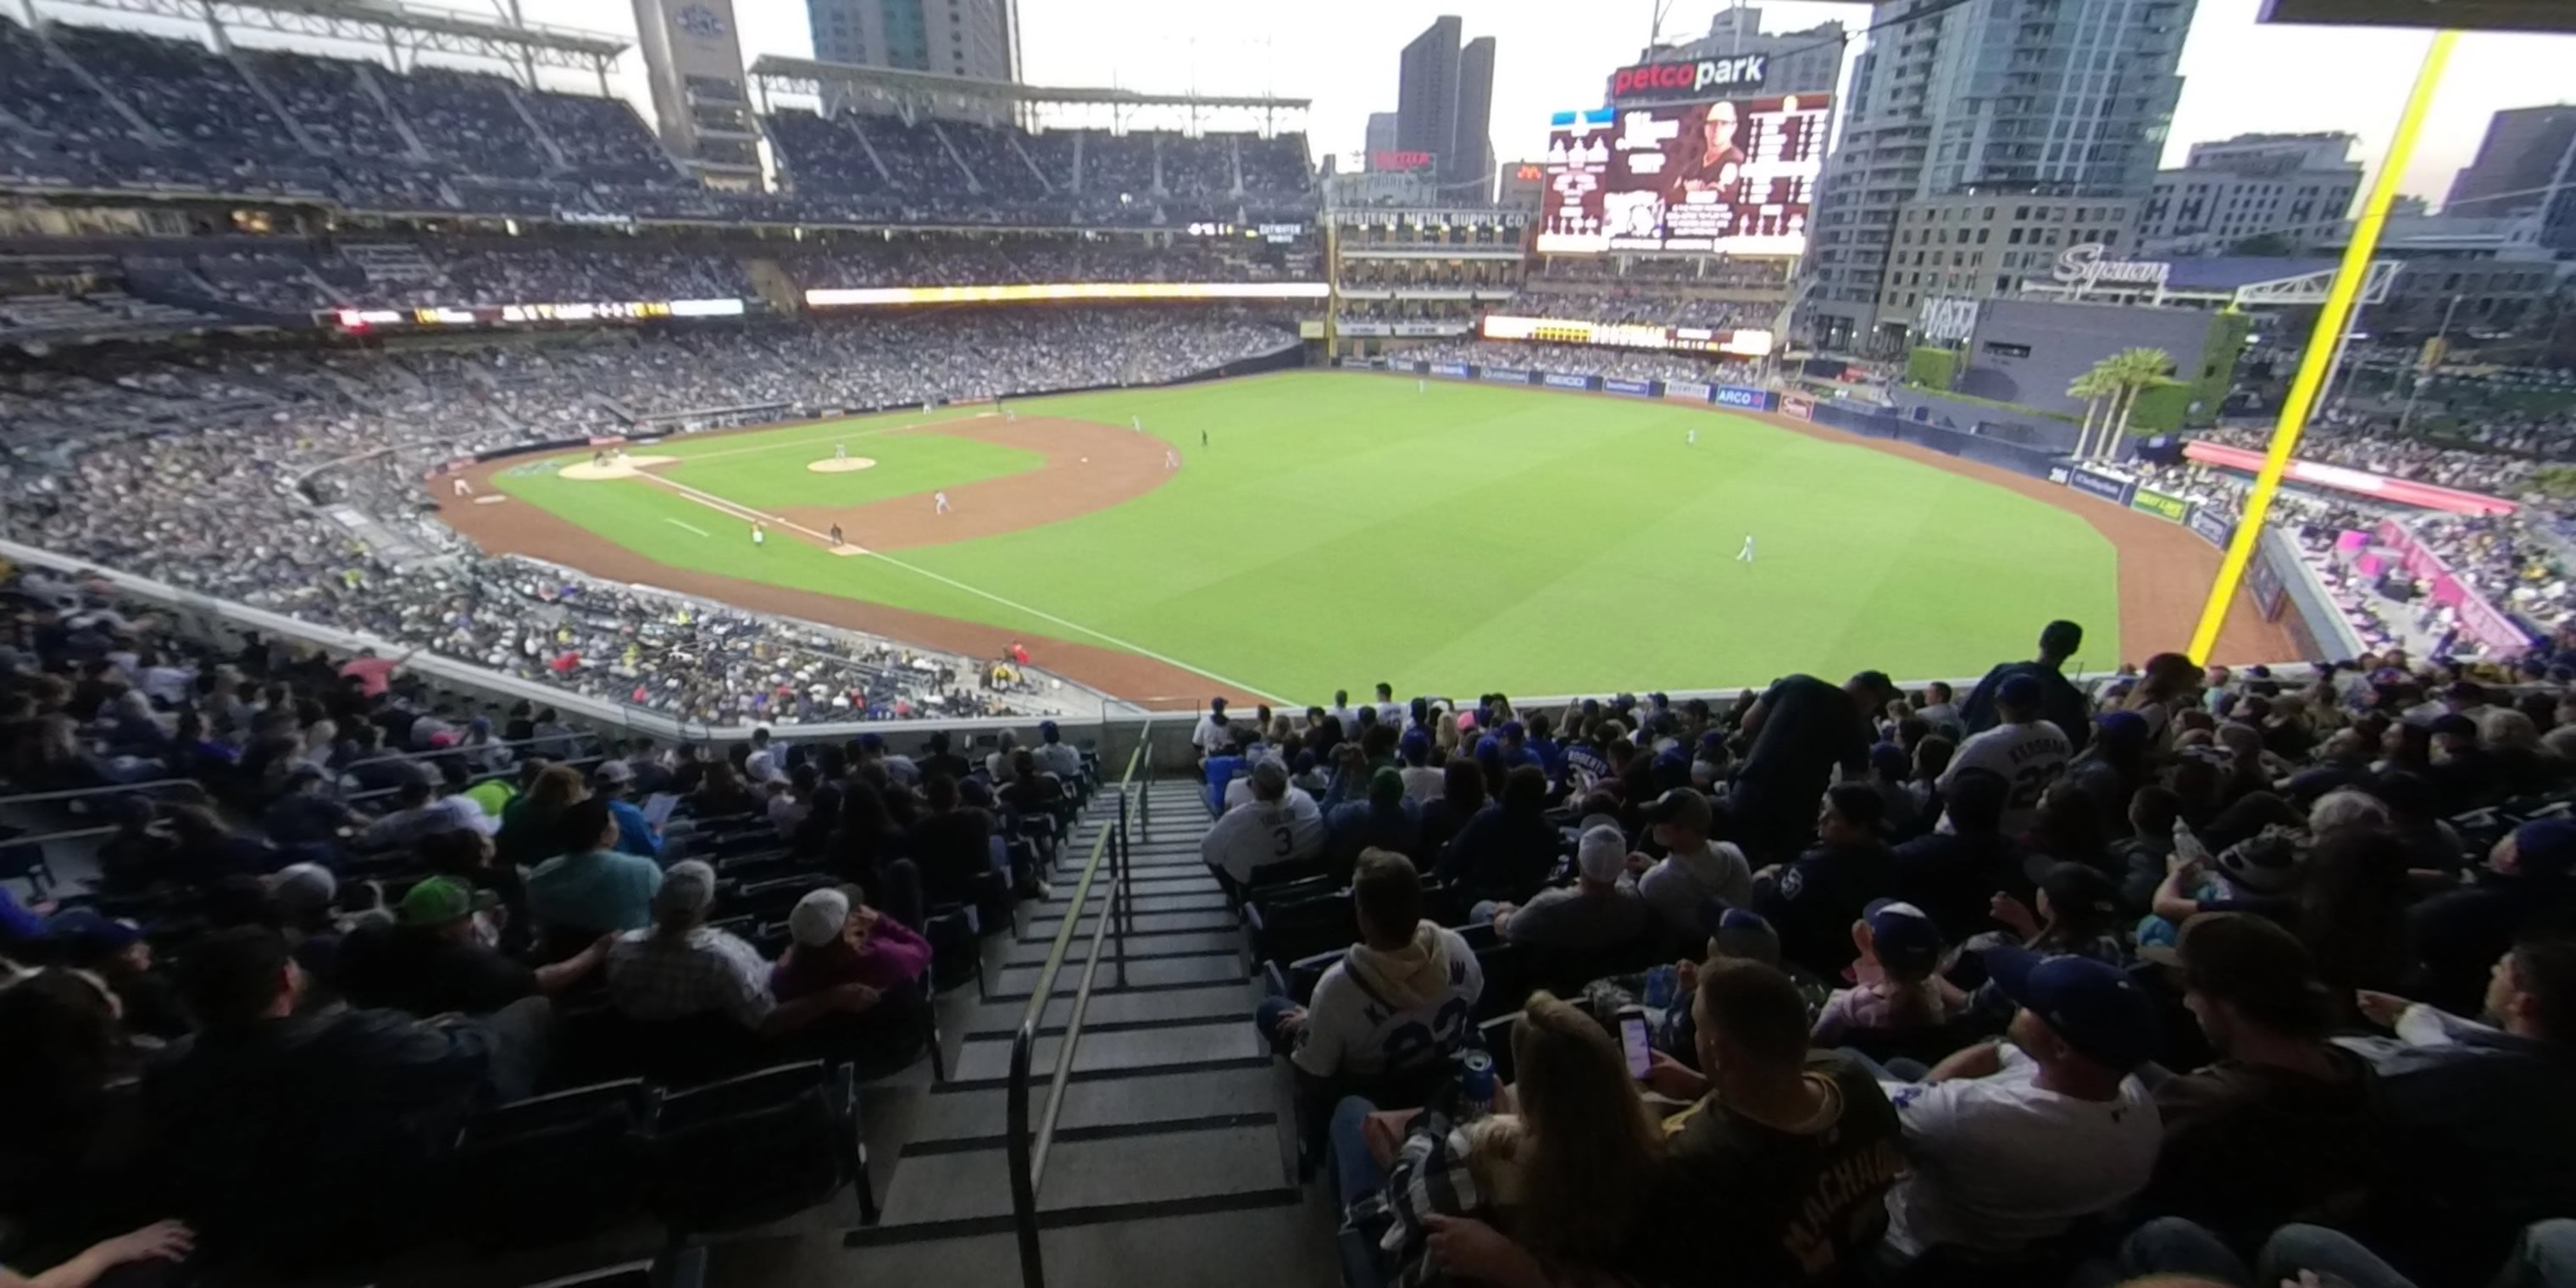 section 219 panoramic seat view  for baseball - petco park